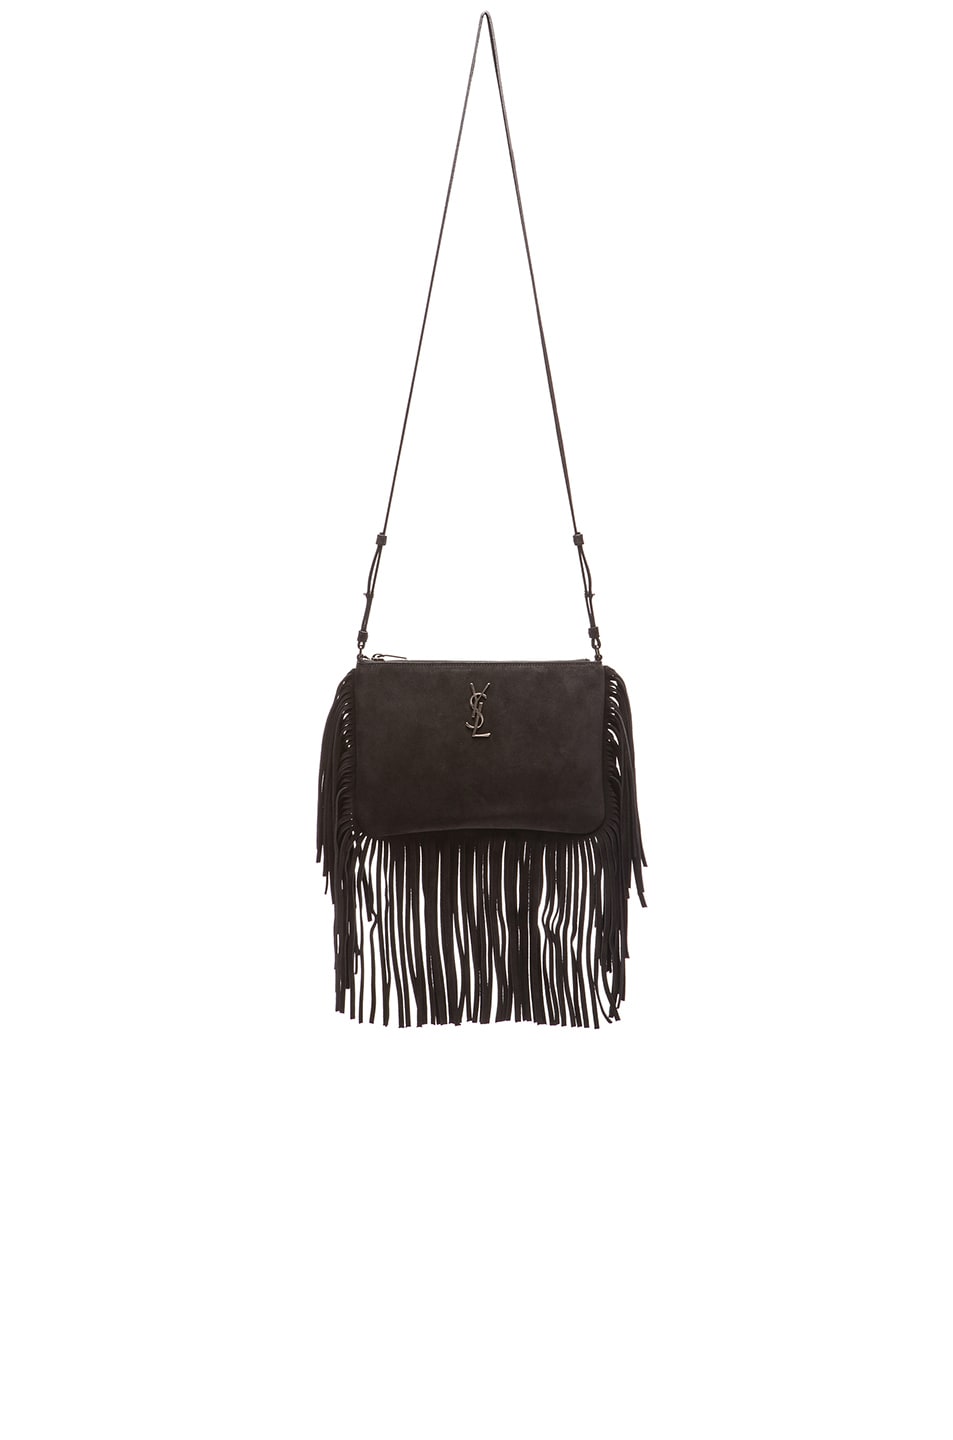 Saint Laurent Anita Bag with Feathers and Fringe in Chestnut ...